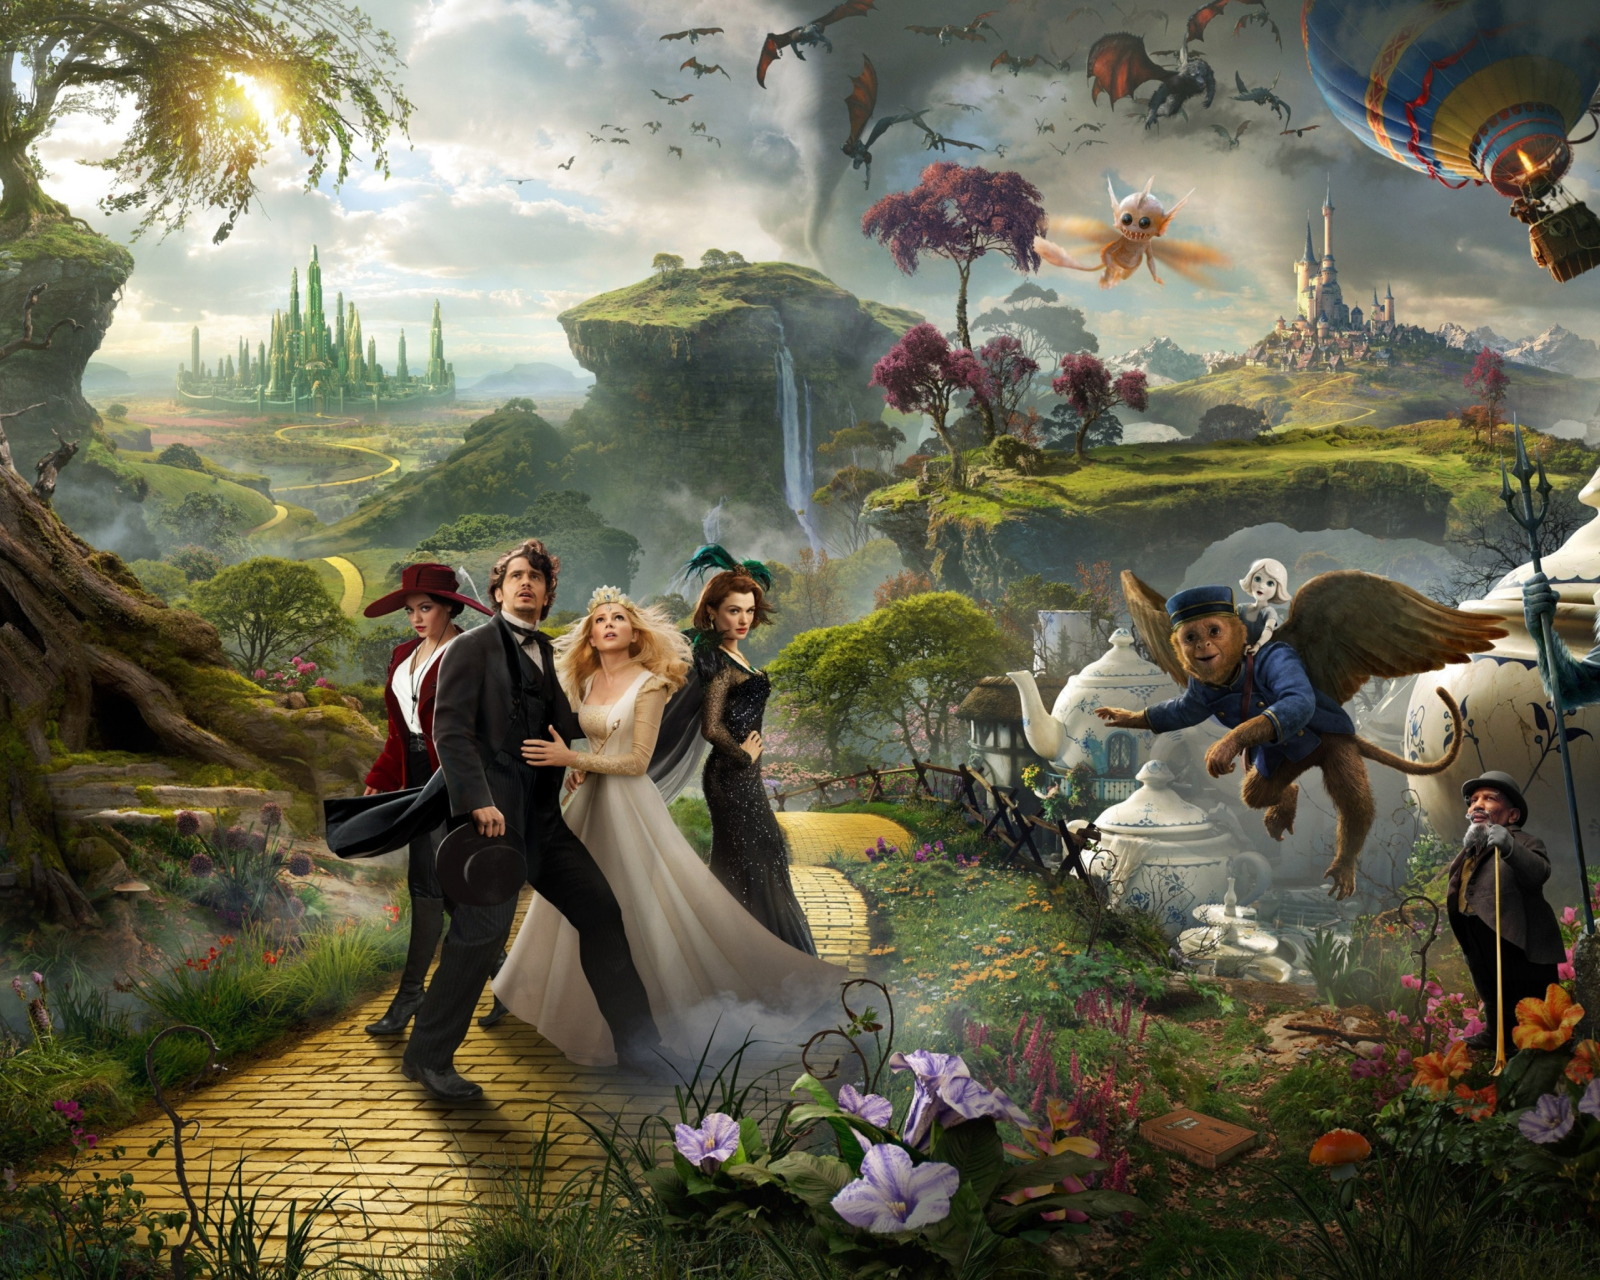 Das Oz The Great And Powerful 2013 Movie Wallpaper 1600x1280